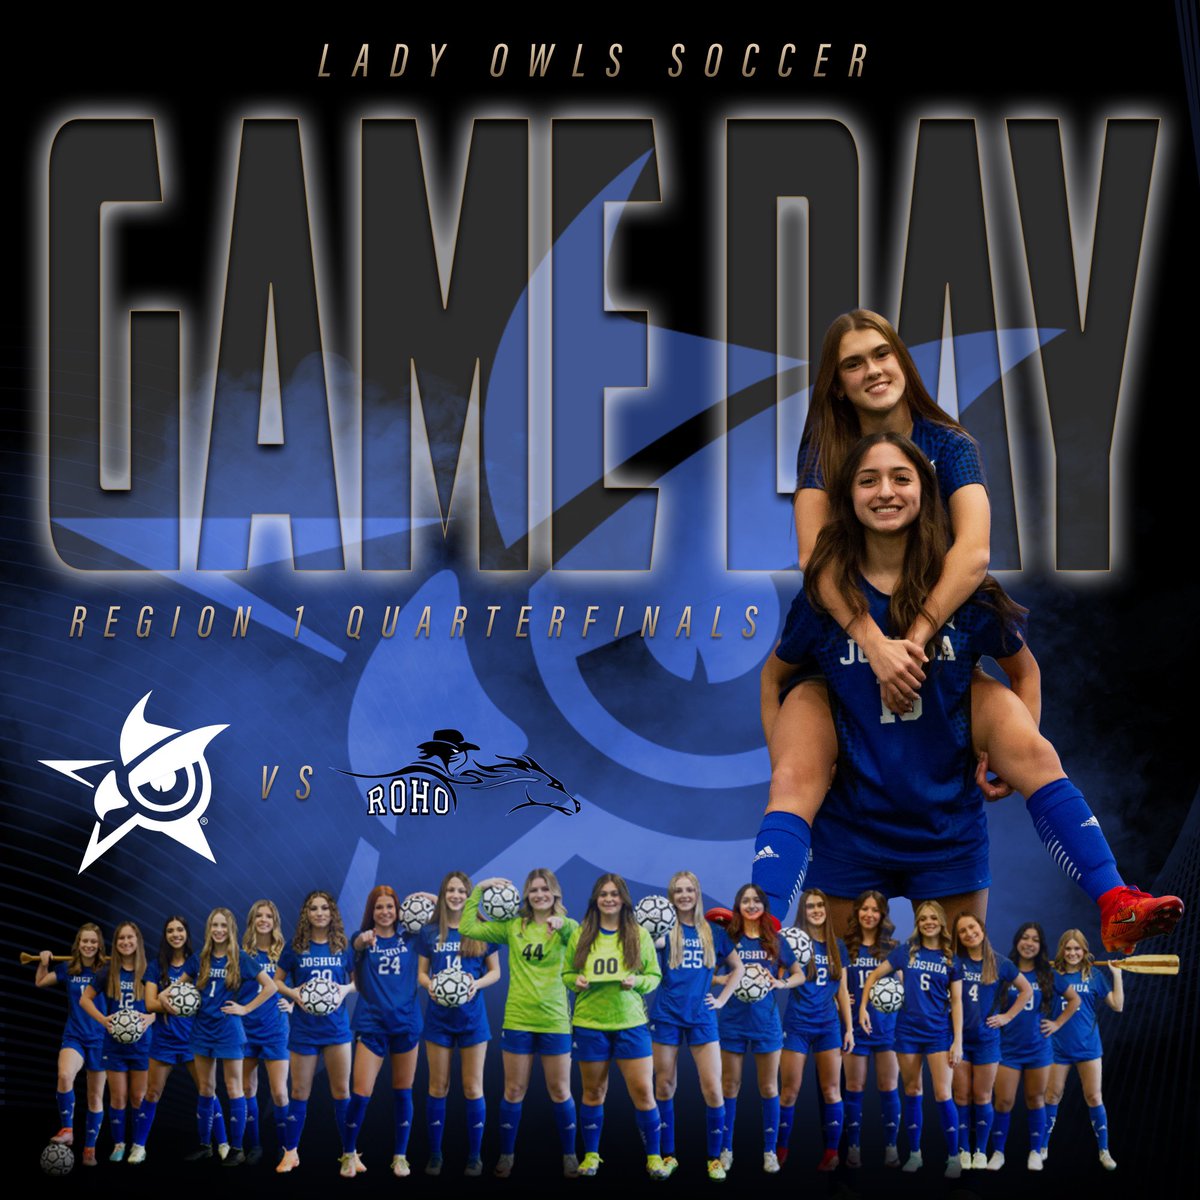 It’s GAME DAY! Regional Quarterfinals vs Rider will be played at 4 pm at the Northwest ISD Stadium. Tickets are cash only at the gate. See you there. Let’s Go Lady Owls! 💙🦉⚽️@JoshuaISD @Gosset41 @LethalSoccer